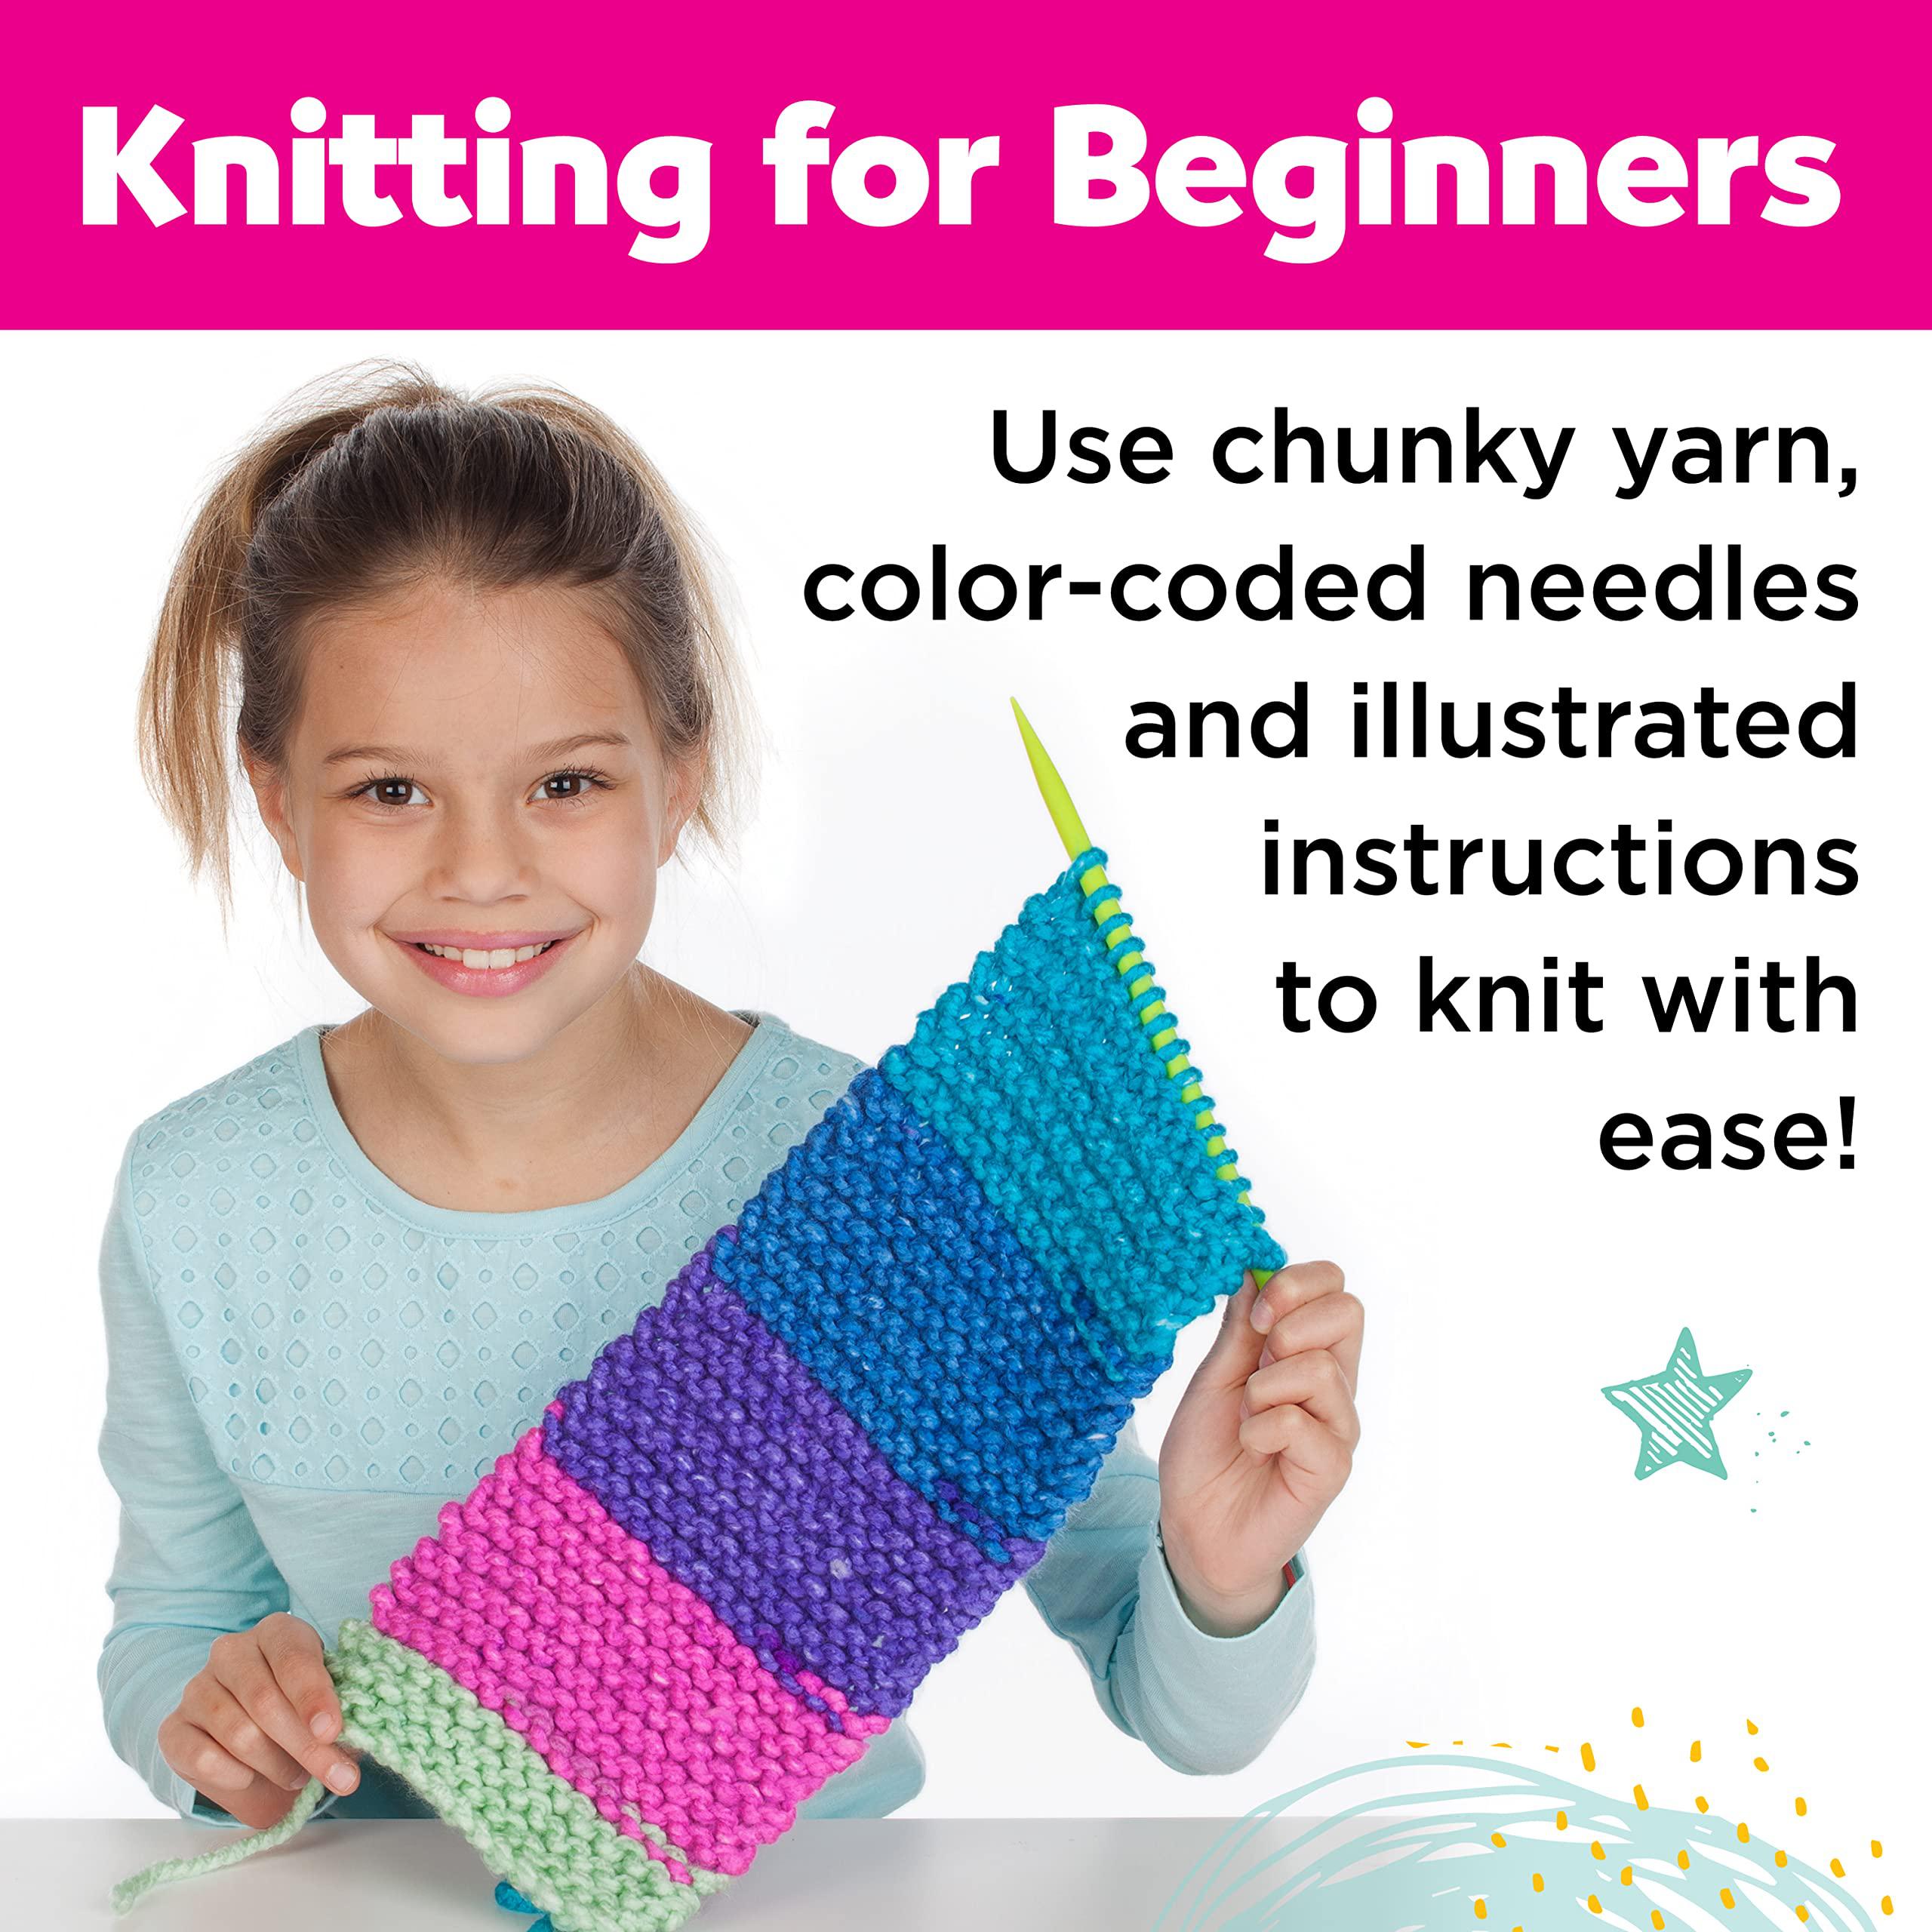 Faber-Castell creativity for kids learn to knit pocket scarf - diy knitting  kit for beginners, kids craft kit